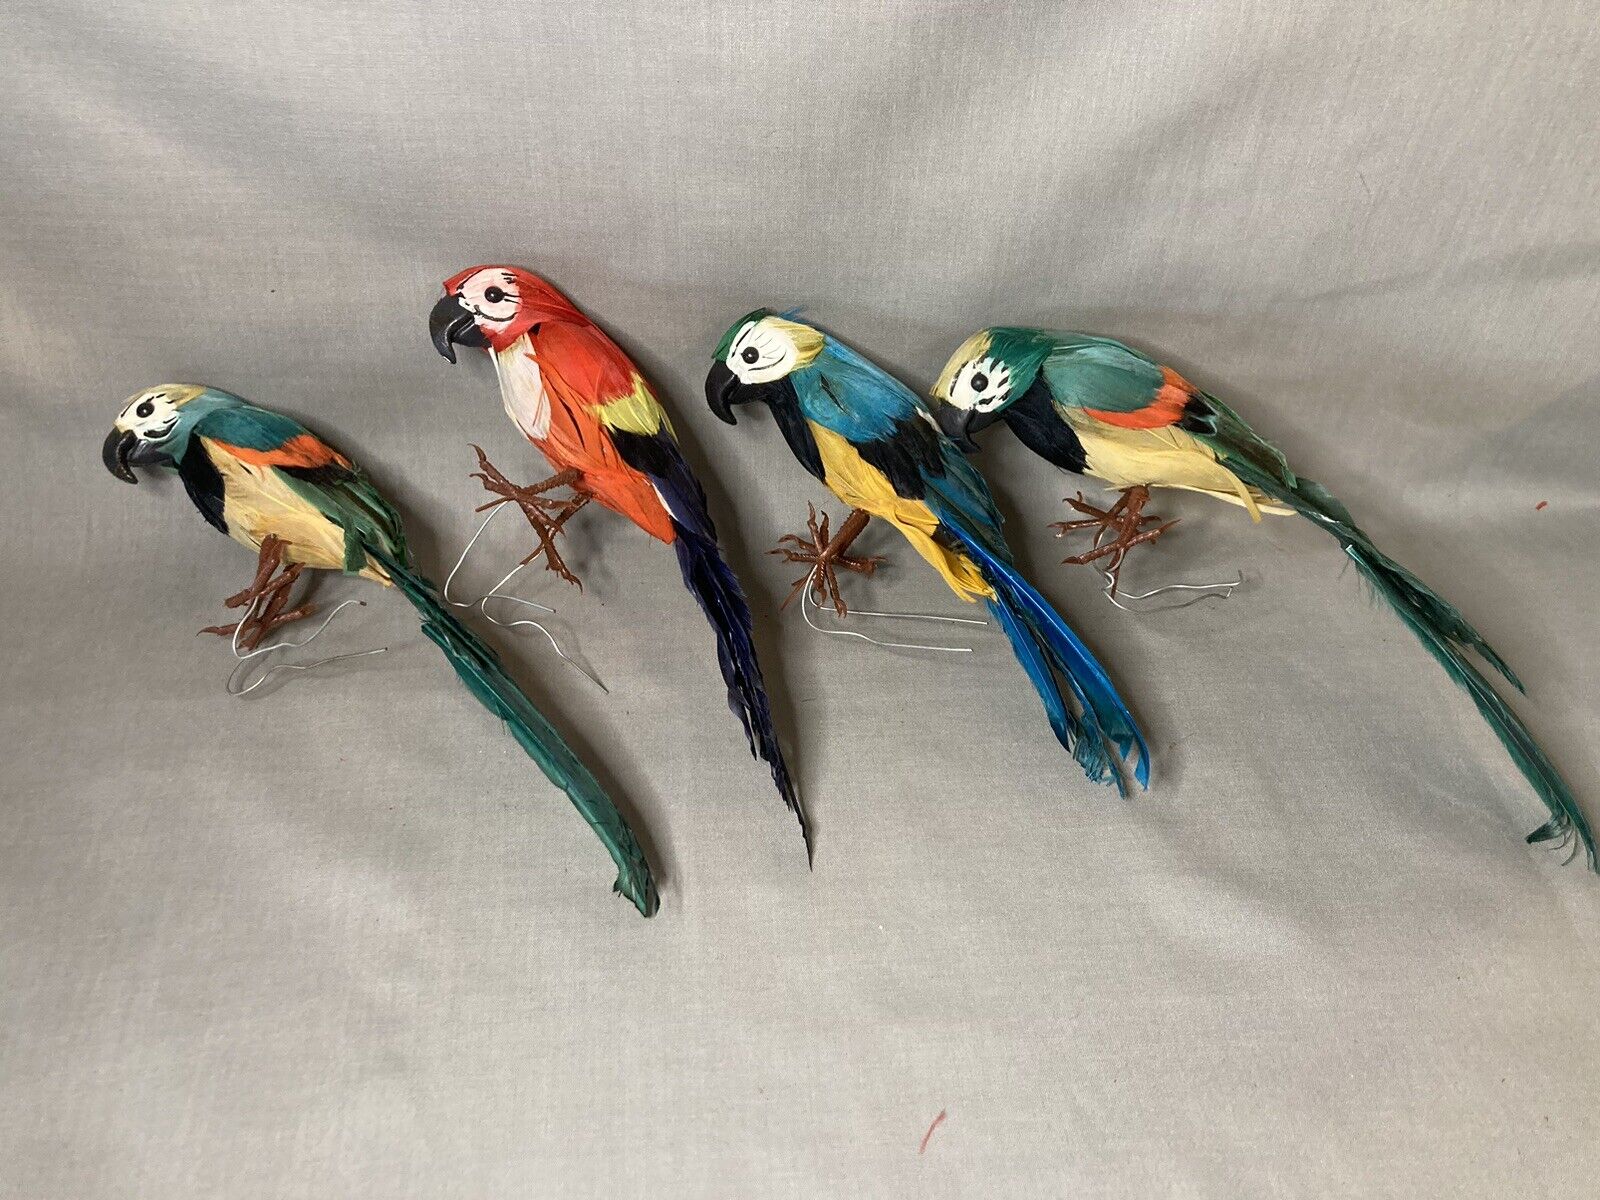 4 Vintage Feather Bird Parrot Christmas Ornaments Wire-On Real Feathers